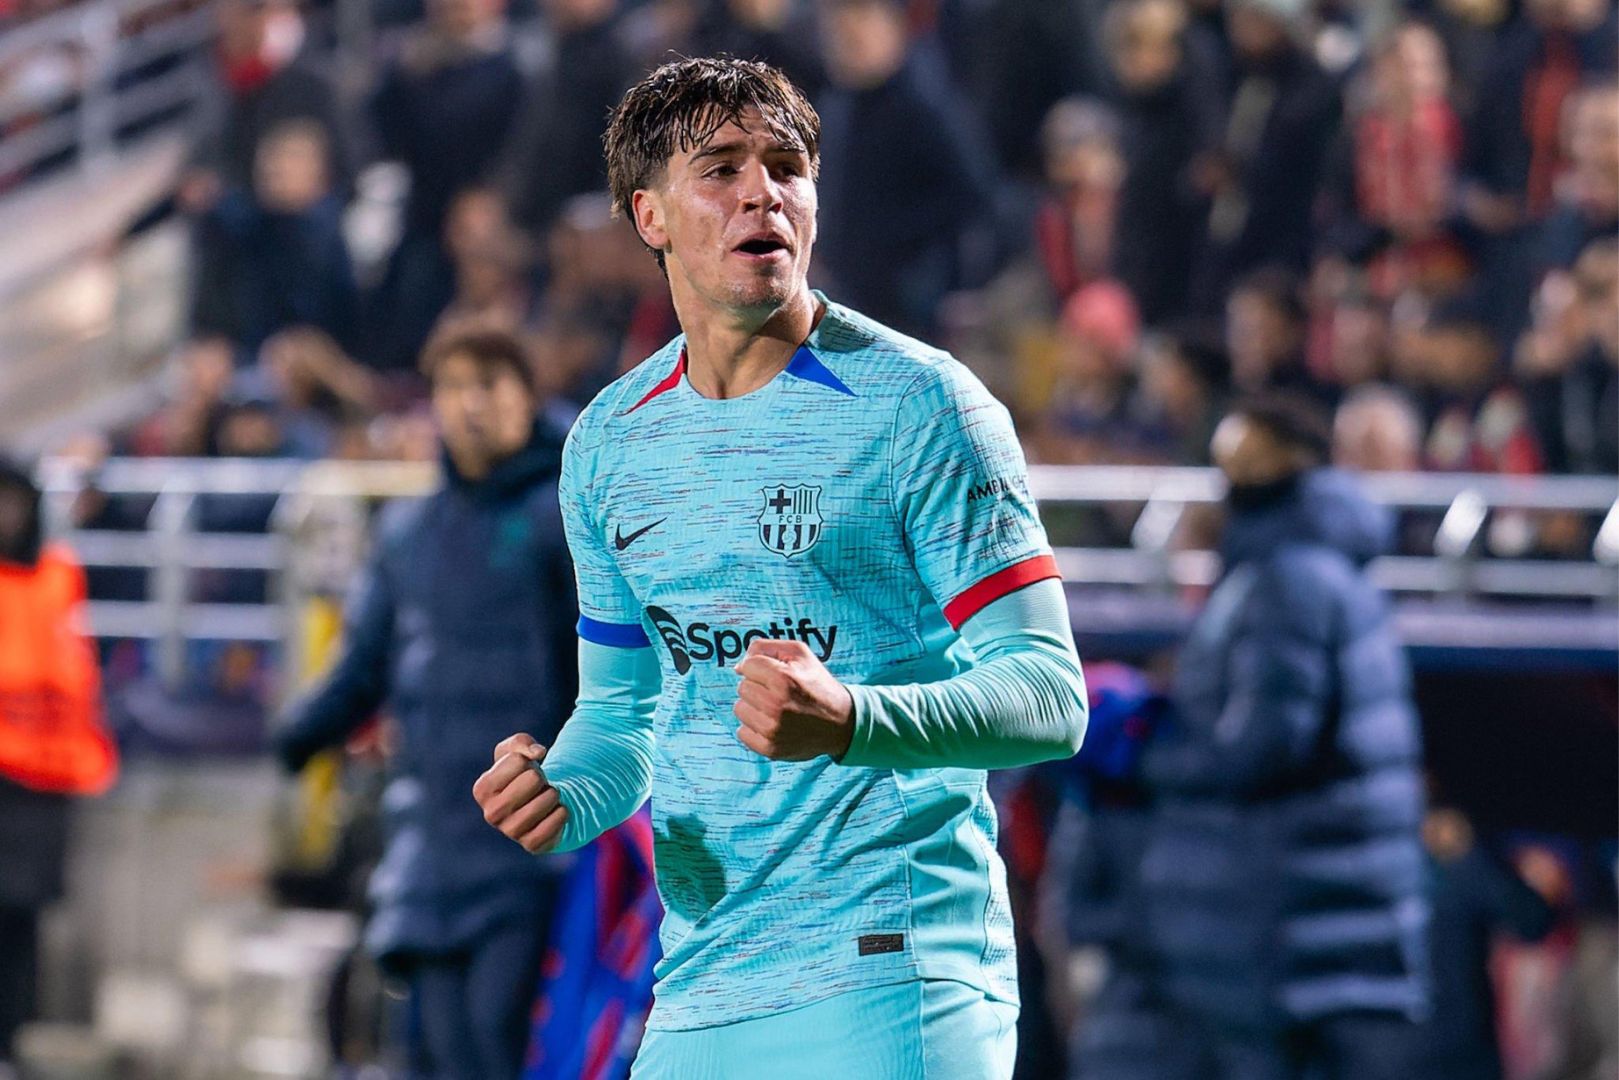 ANTWERPEN, BELGIUM - DECEMBER 13: Marc Guiu of FC Barcelona celebrates after scoring the team's second goal during the UEFA Champions League Group H match between Royal Antwerp FC and FC Barcelona at the Stadion Bosuil on December 13, 2023 in Antwerpen, Belgium.